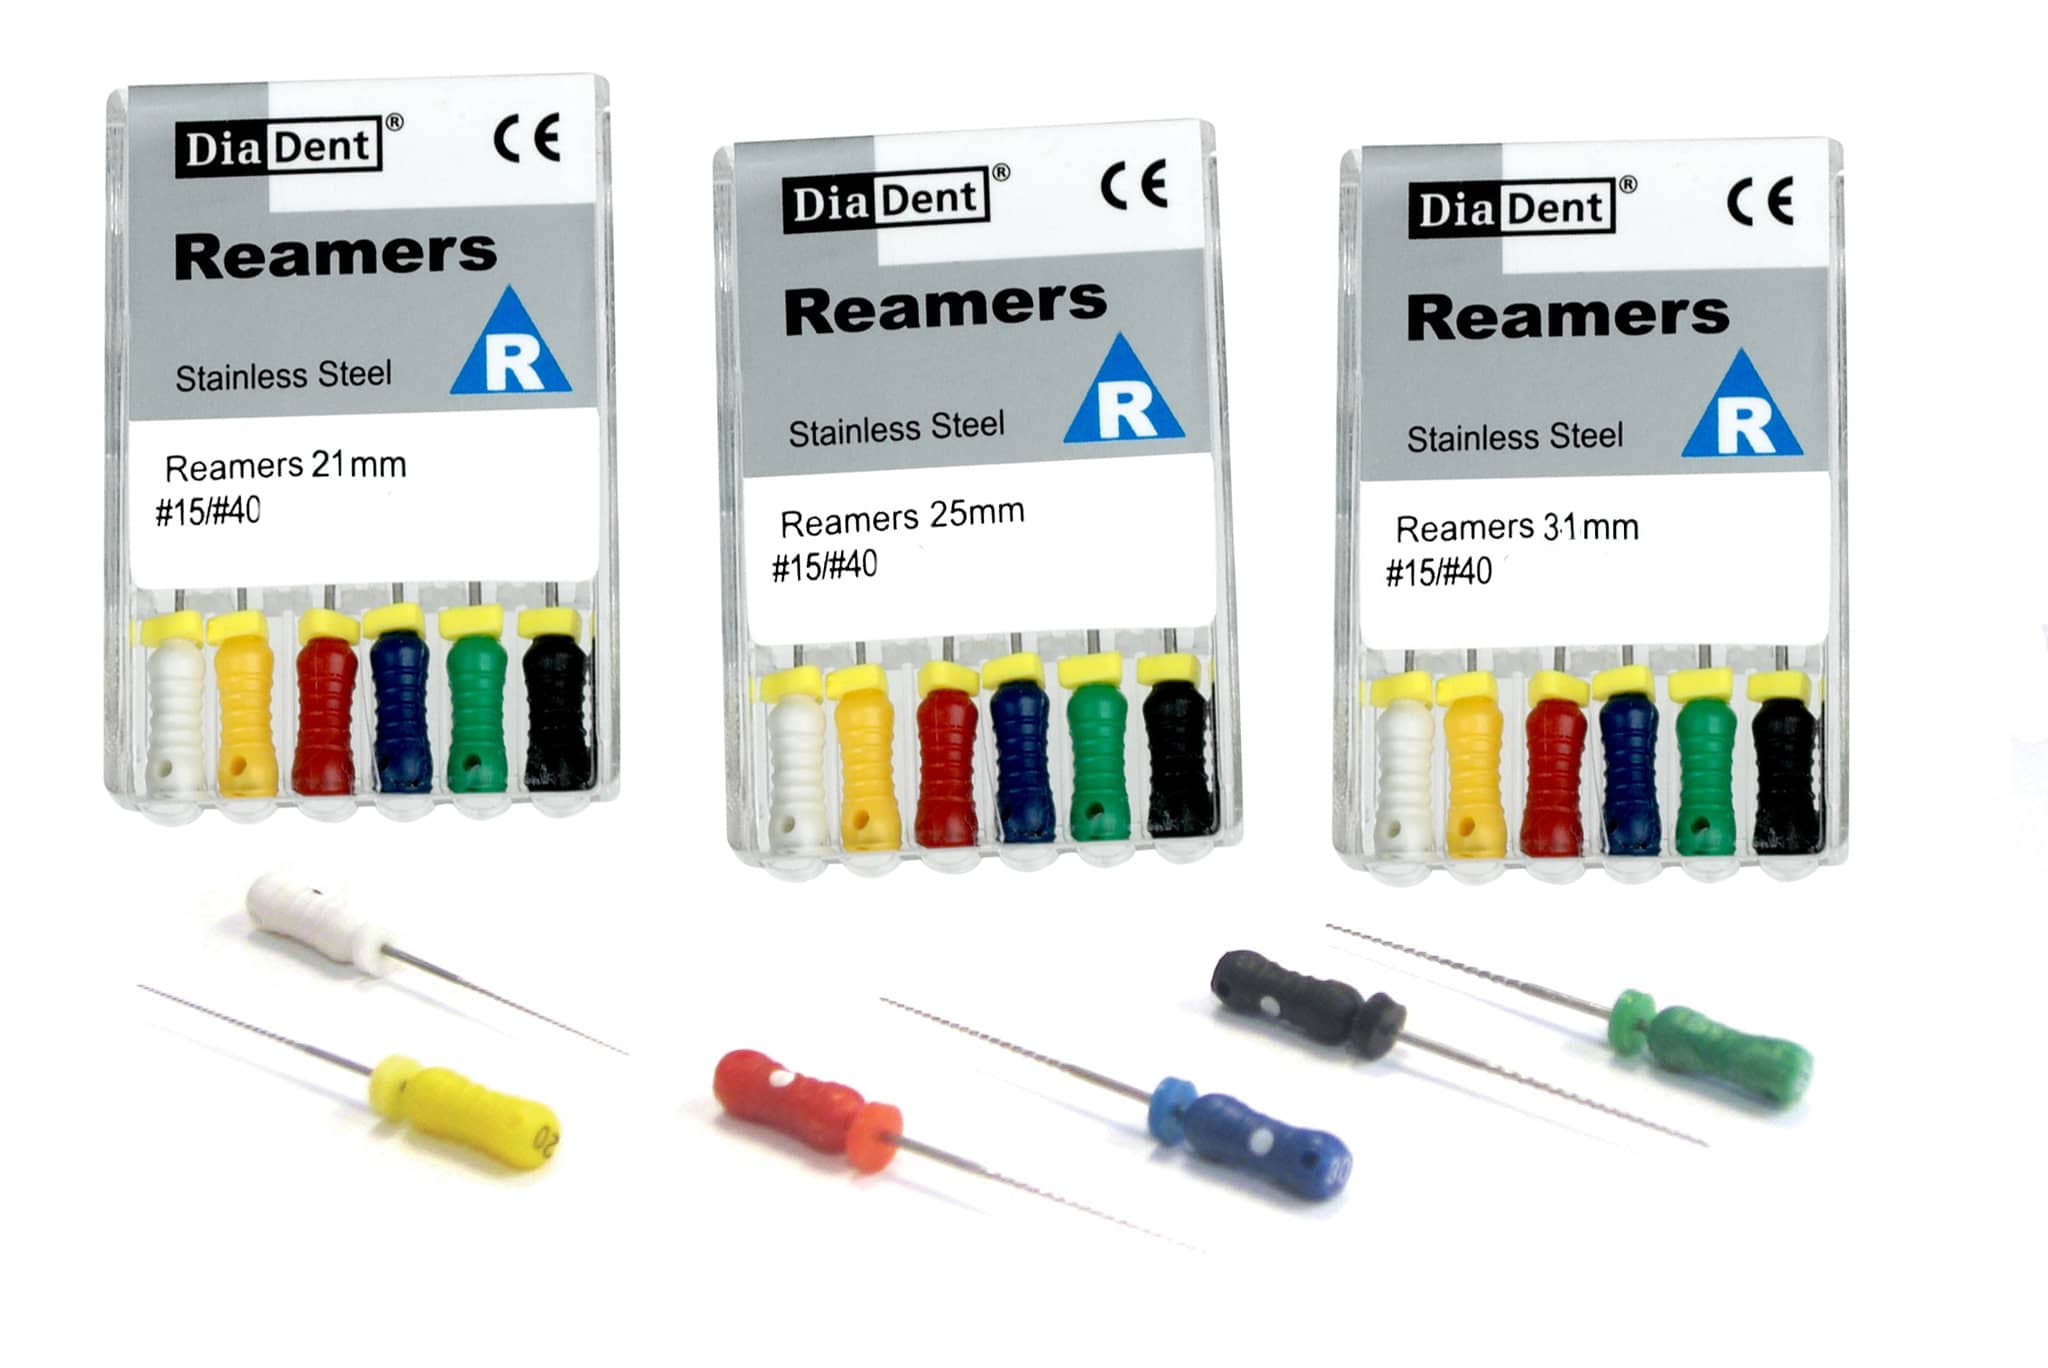 REAMERS Diadent 31mm - 40